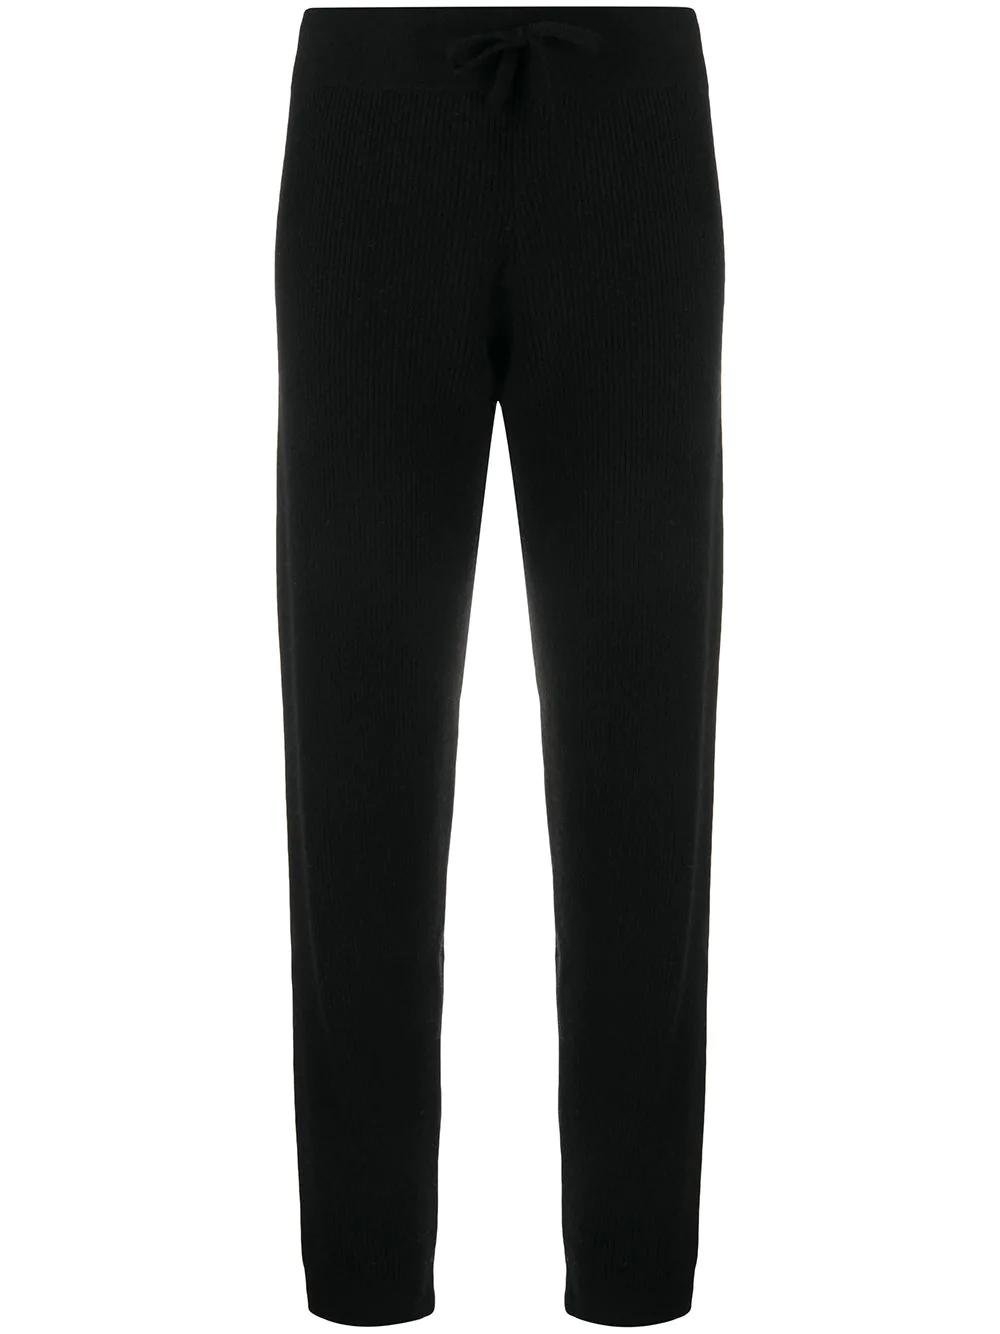 ribbed-knit track pants by CASHMERE IN LOVE